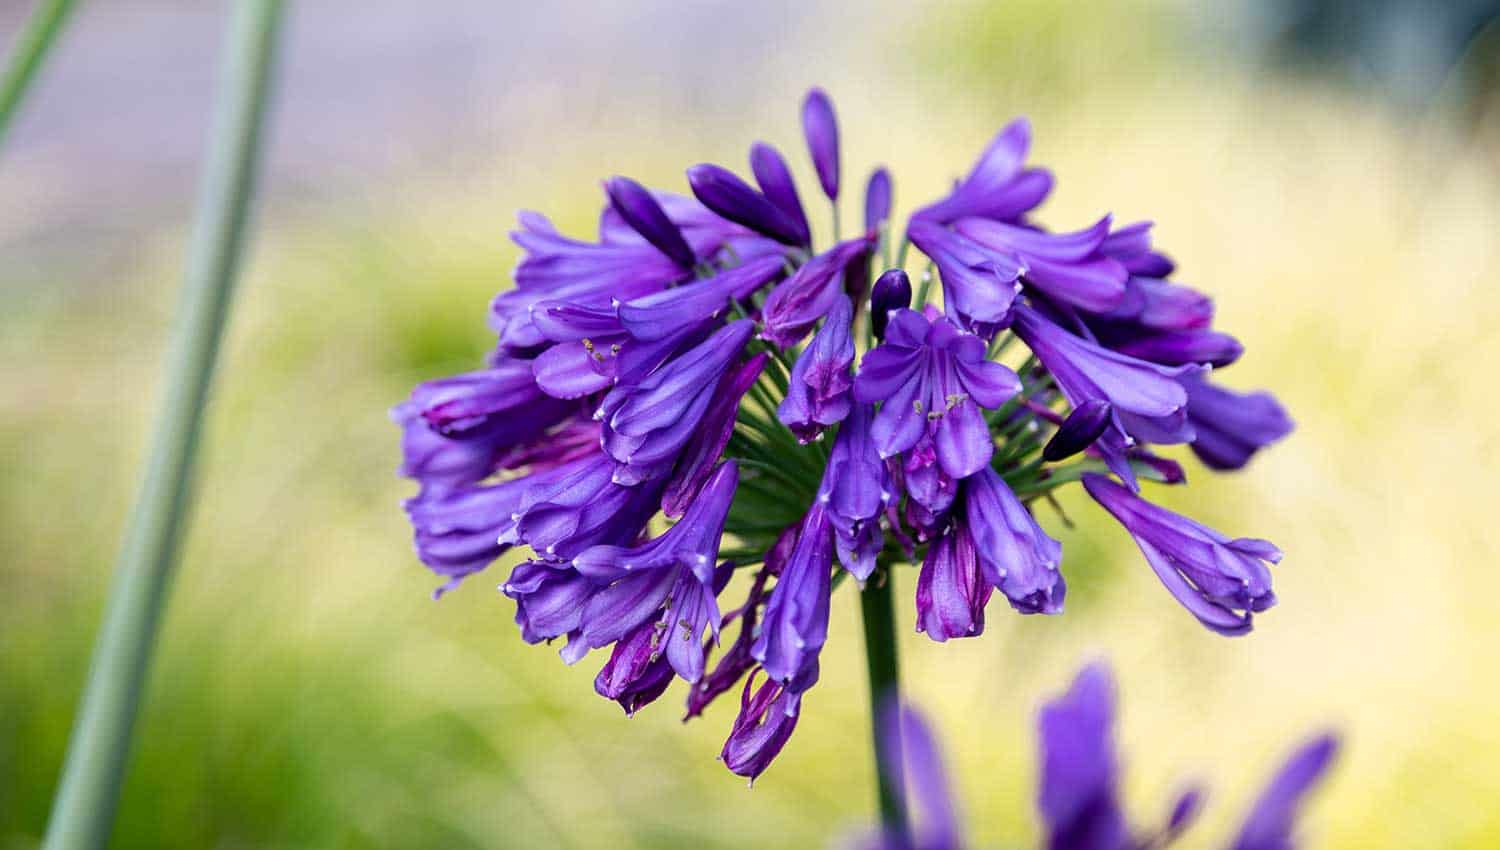 A bright purple bloom head on an Ever Amethyst Agapanthus at close-up view is set on a background of out of focus golden foliage colors